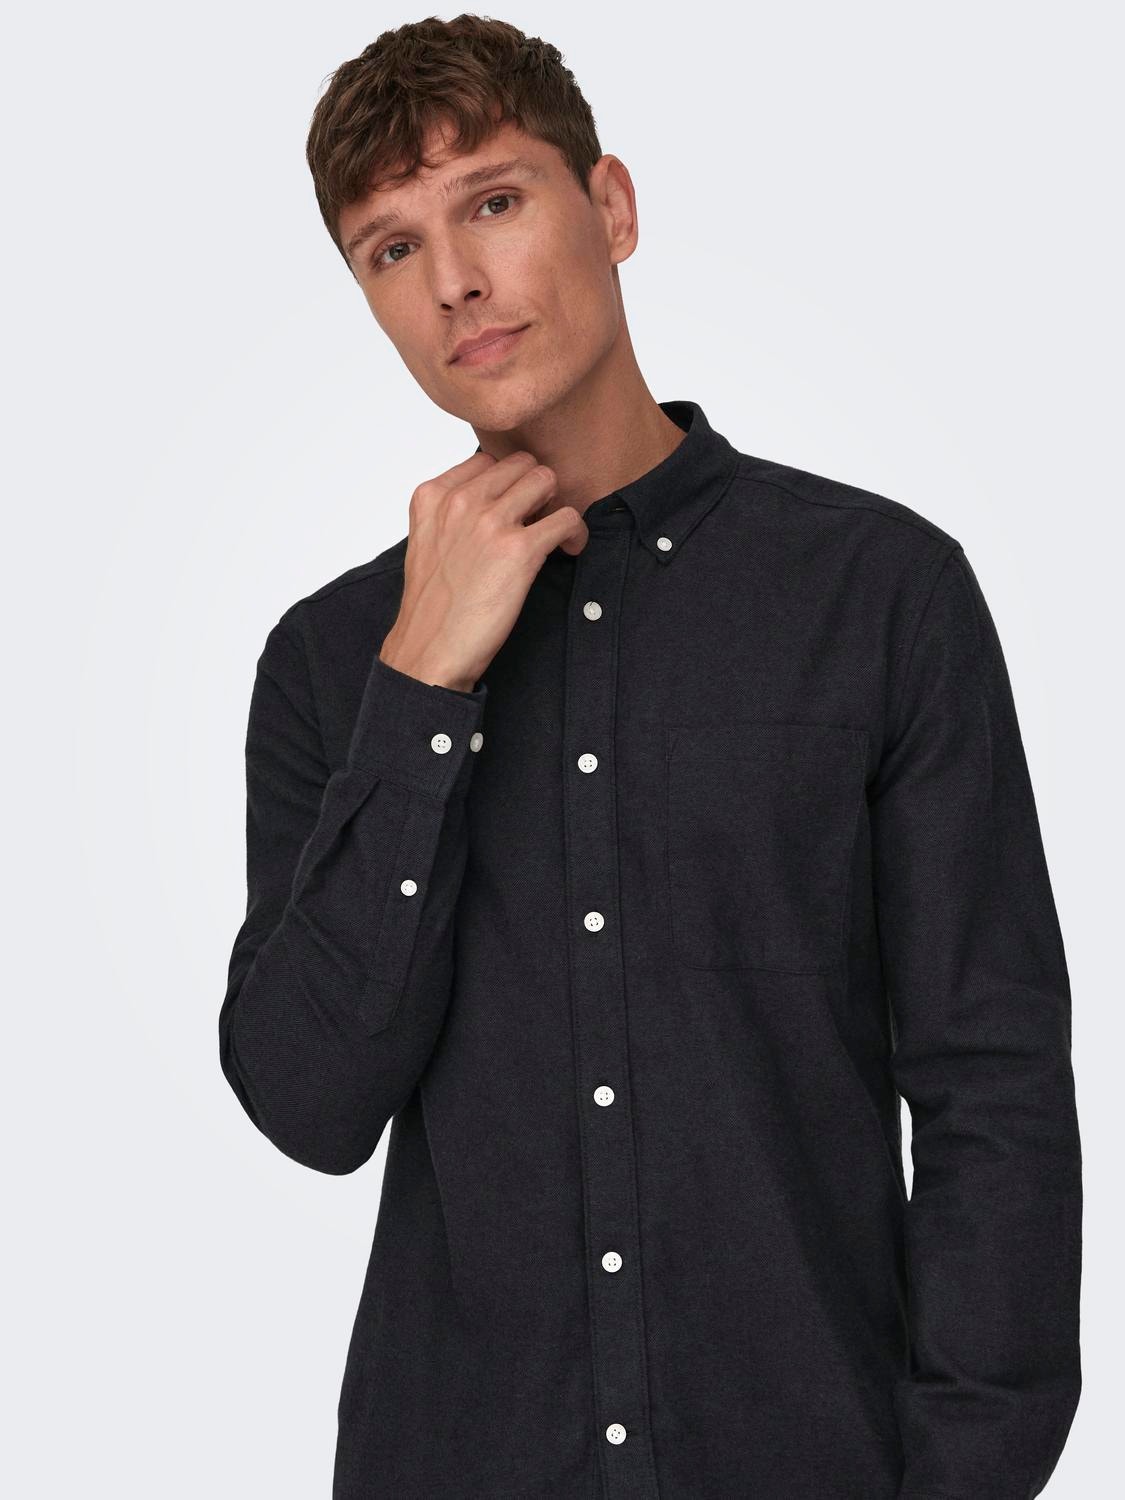 ONLY & SONS Classic shirt -Black - 22027307